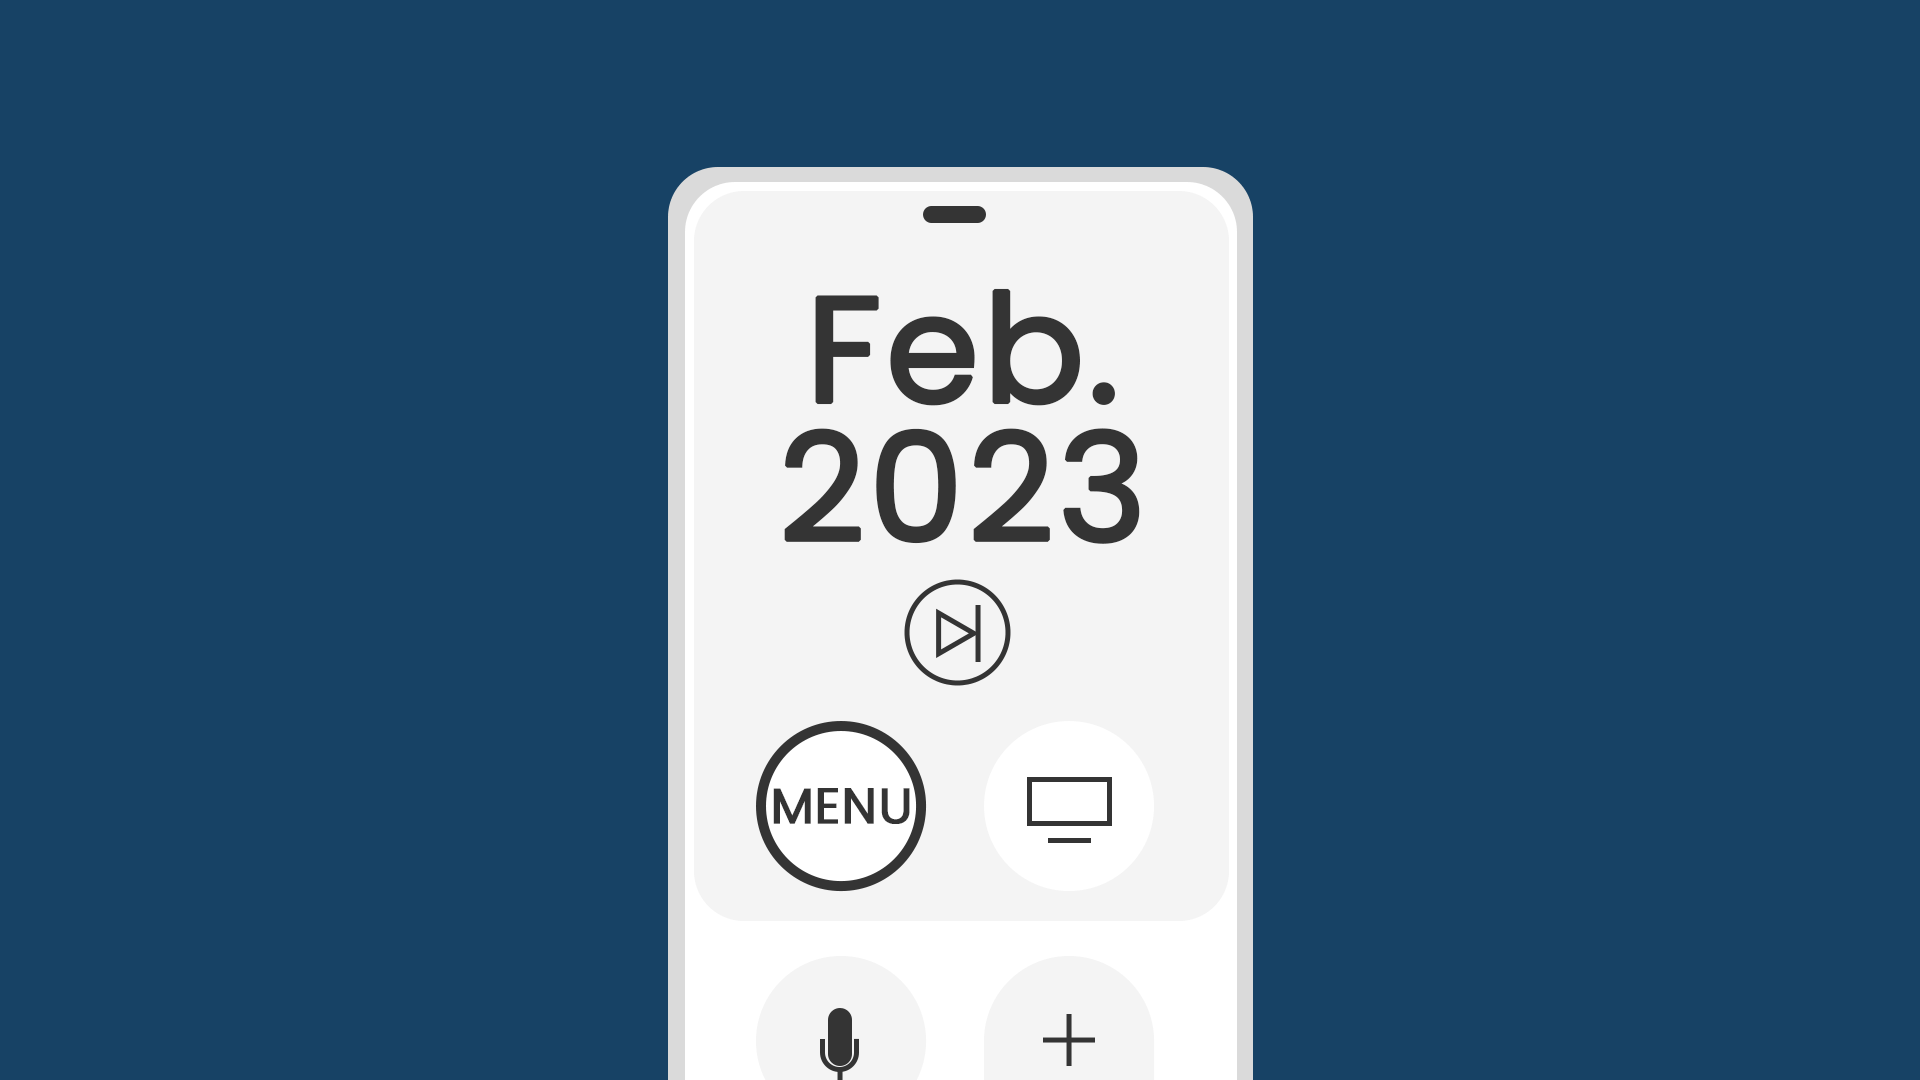 What to watch in February 2023?